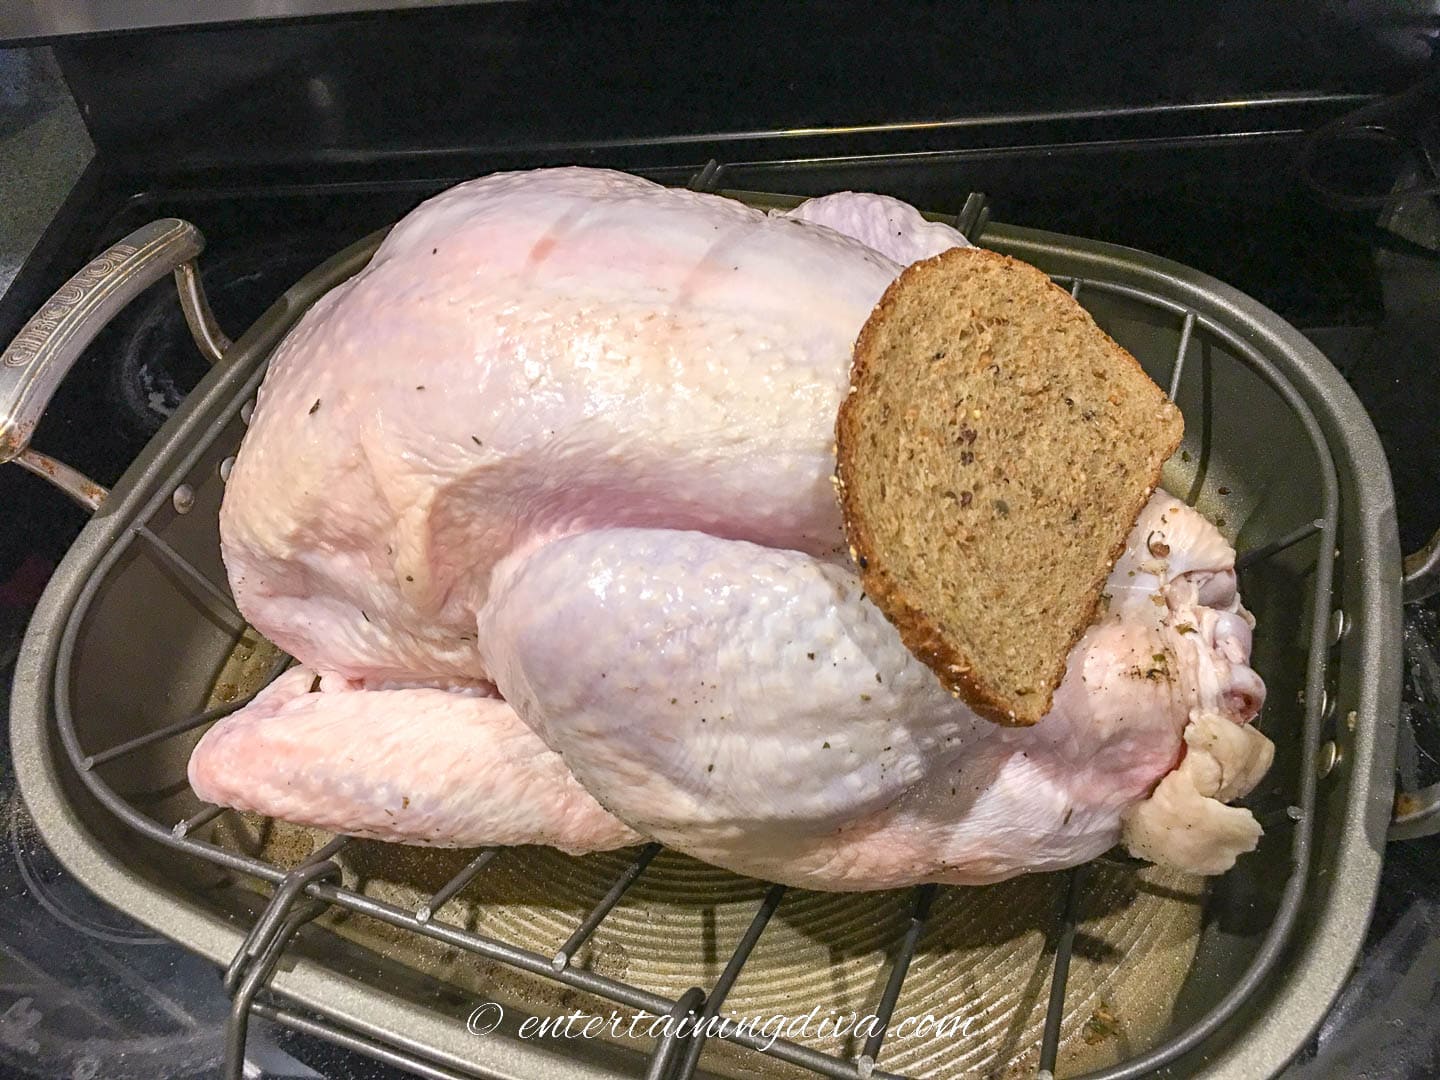 Turkey with bread covering the stuffiing